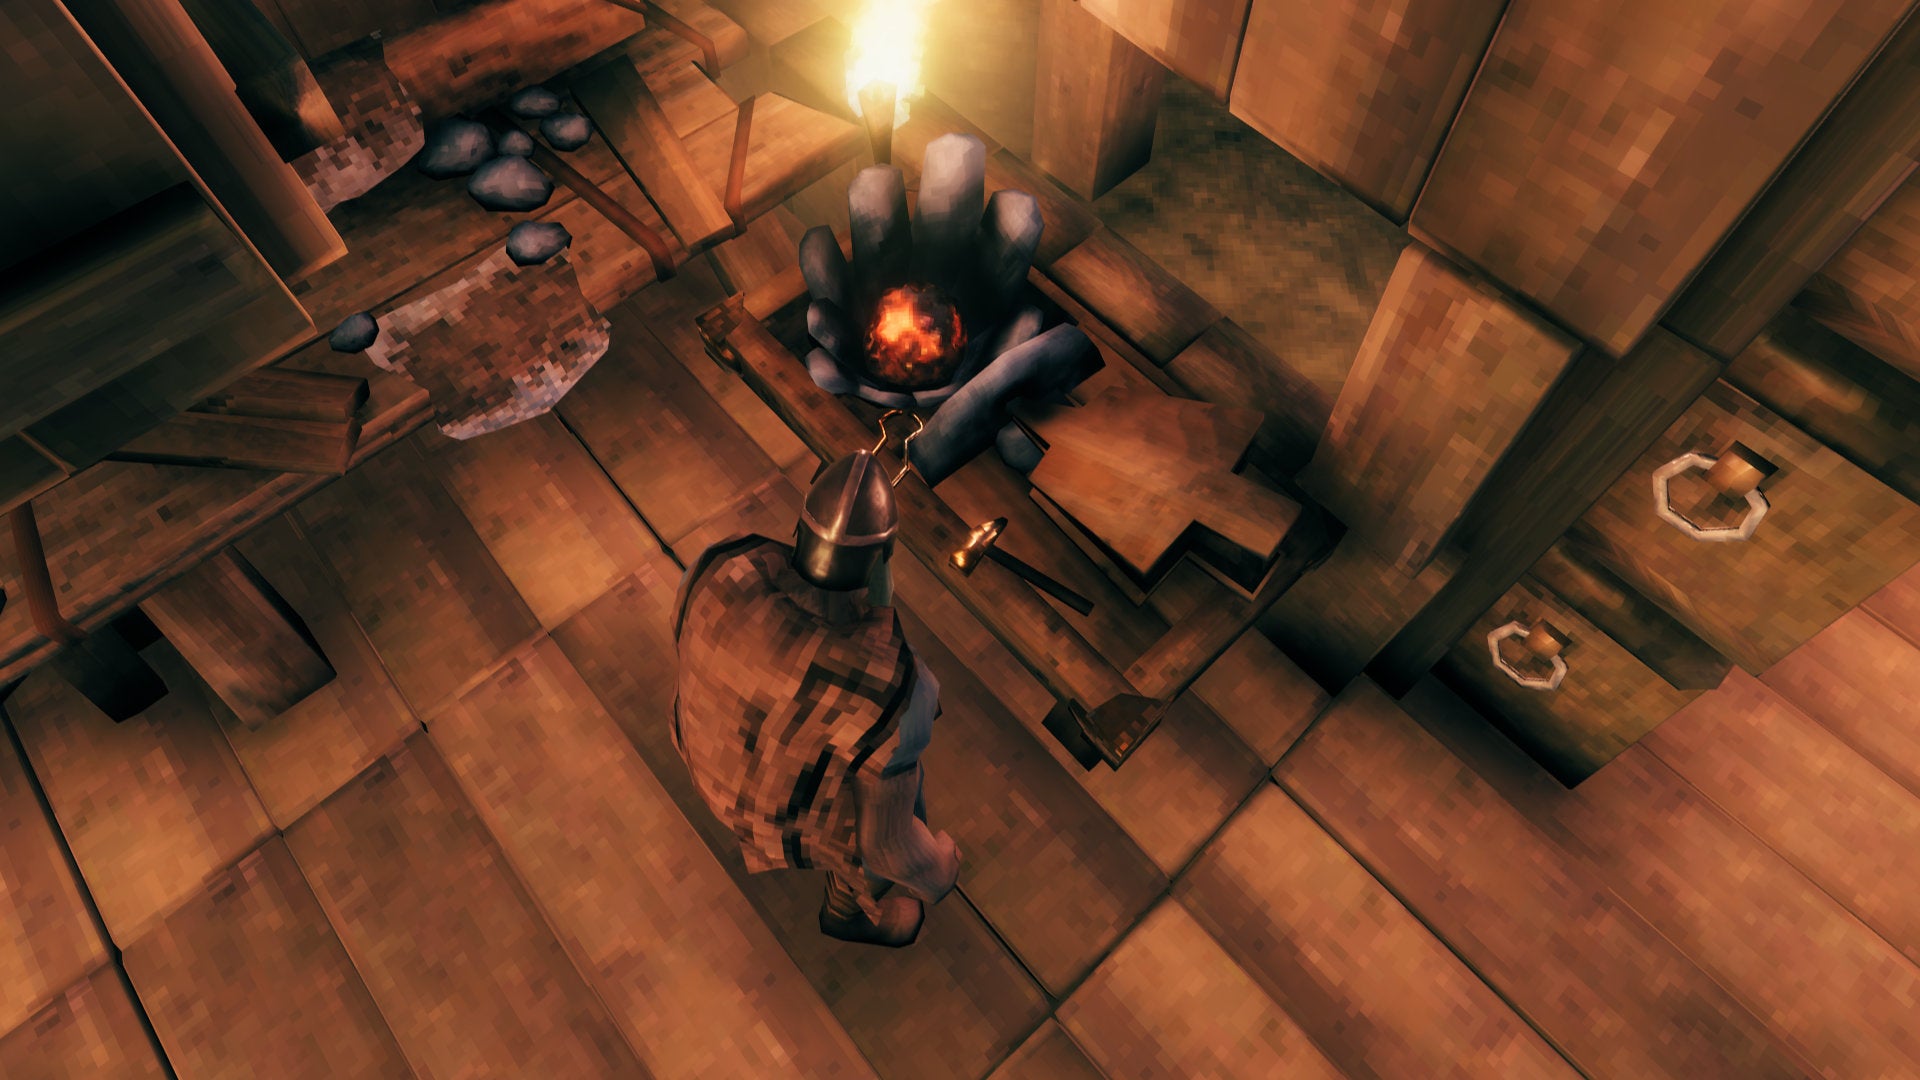 A Valheim screenshot of a Forge placed inside a house, with the player looking down at it.